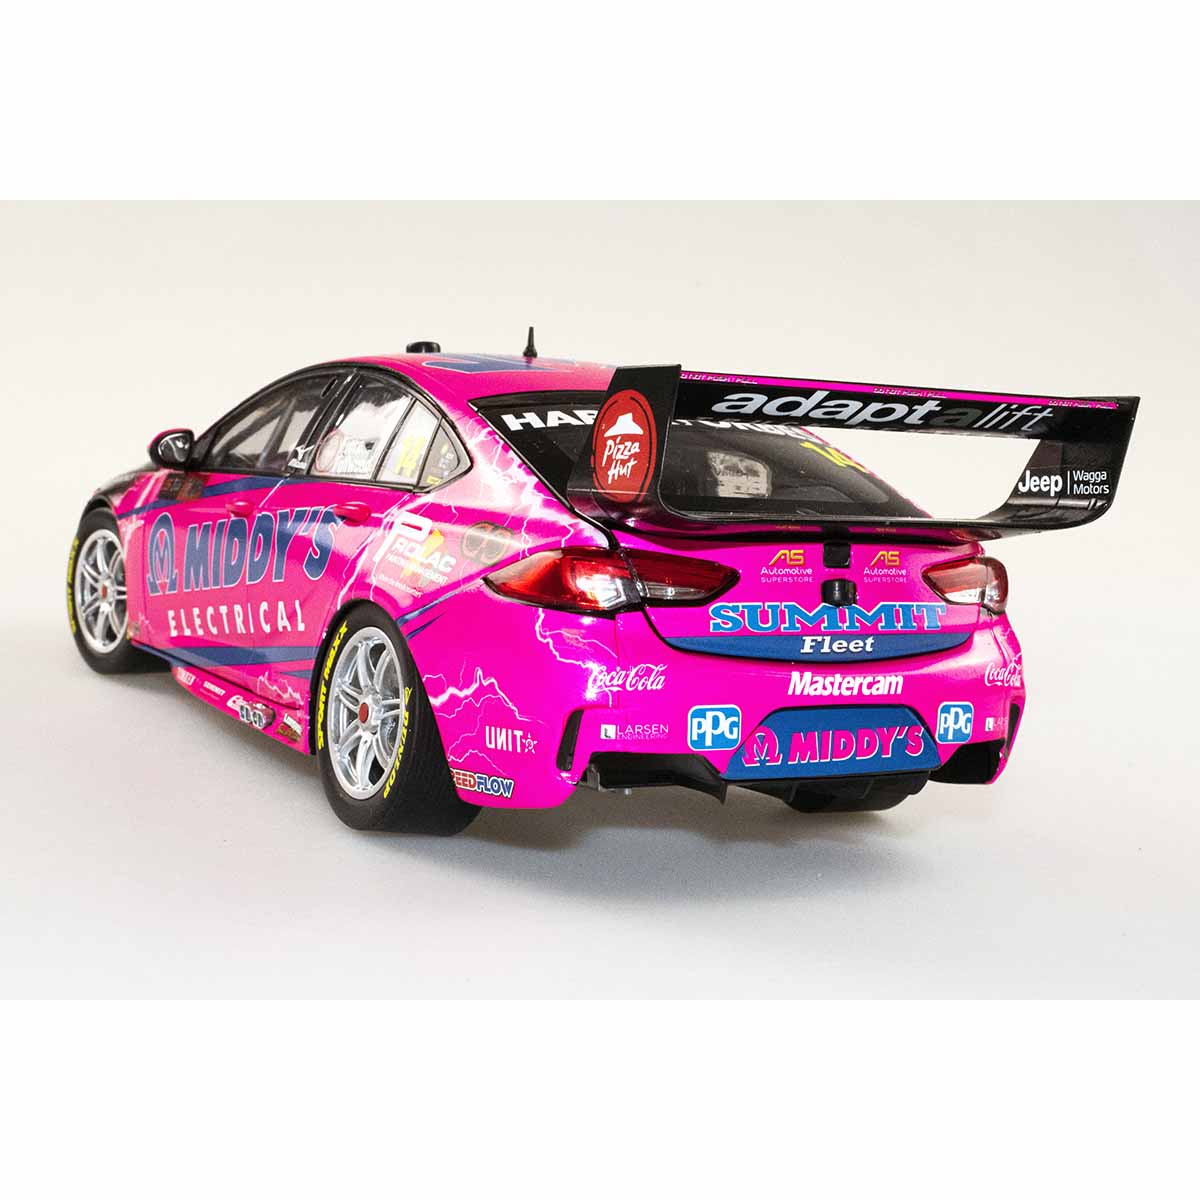 HOLDEN ZB COMMODORE - BJR - FULLWOOD/FIORE - Middy's #14 - 2022 Bathurst 1000 - 1:18 Scale Diecast Model Car